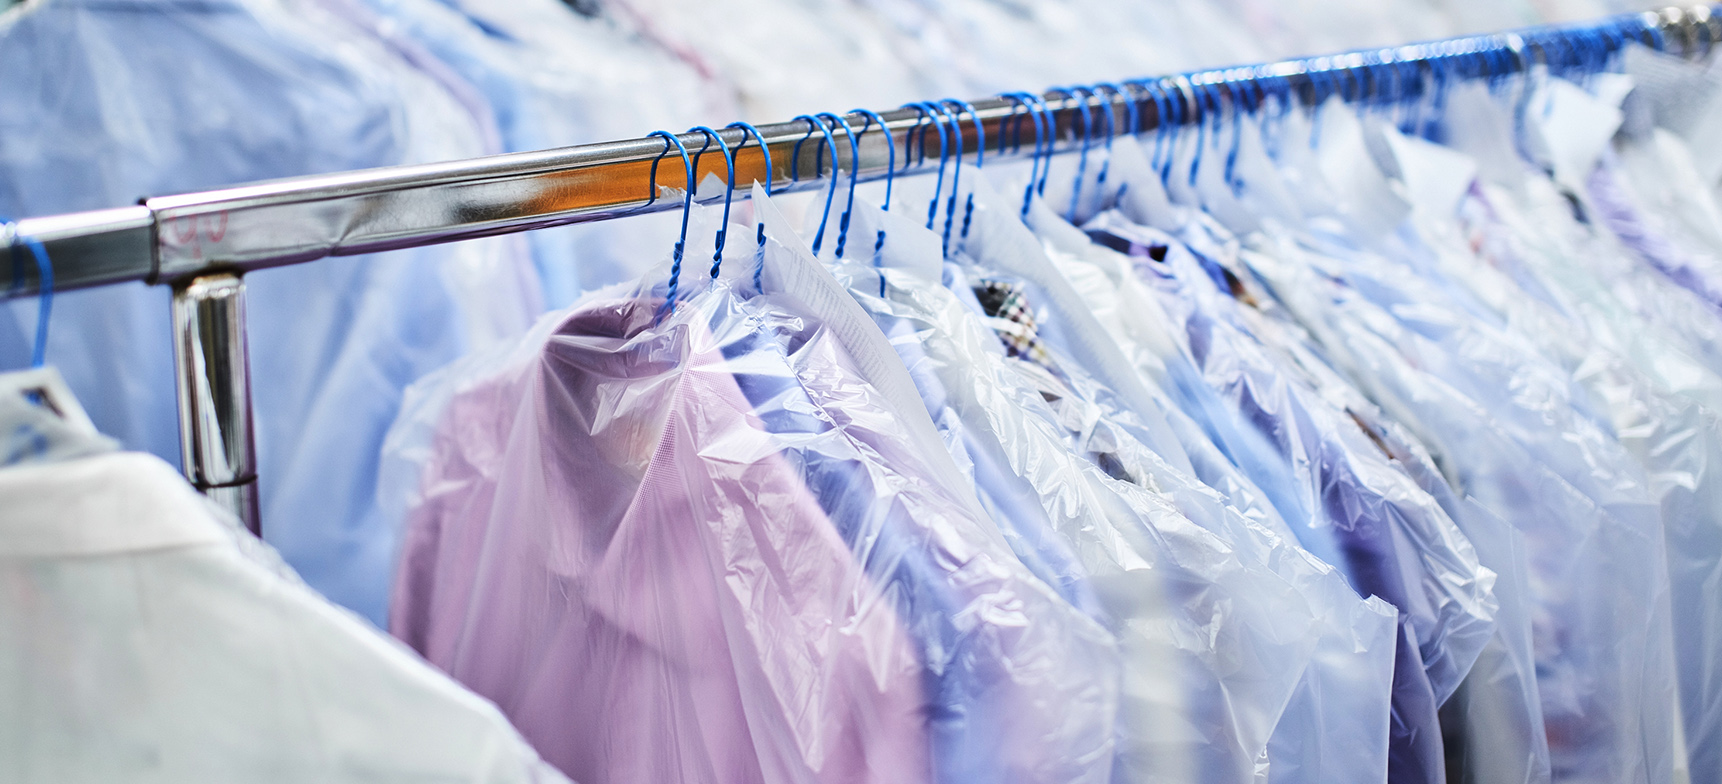 Do You Need To Dry Clean Your Lab Coat?